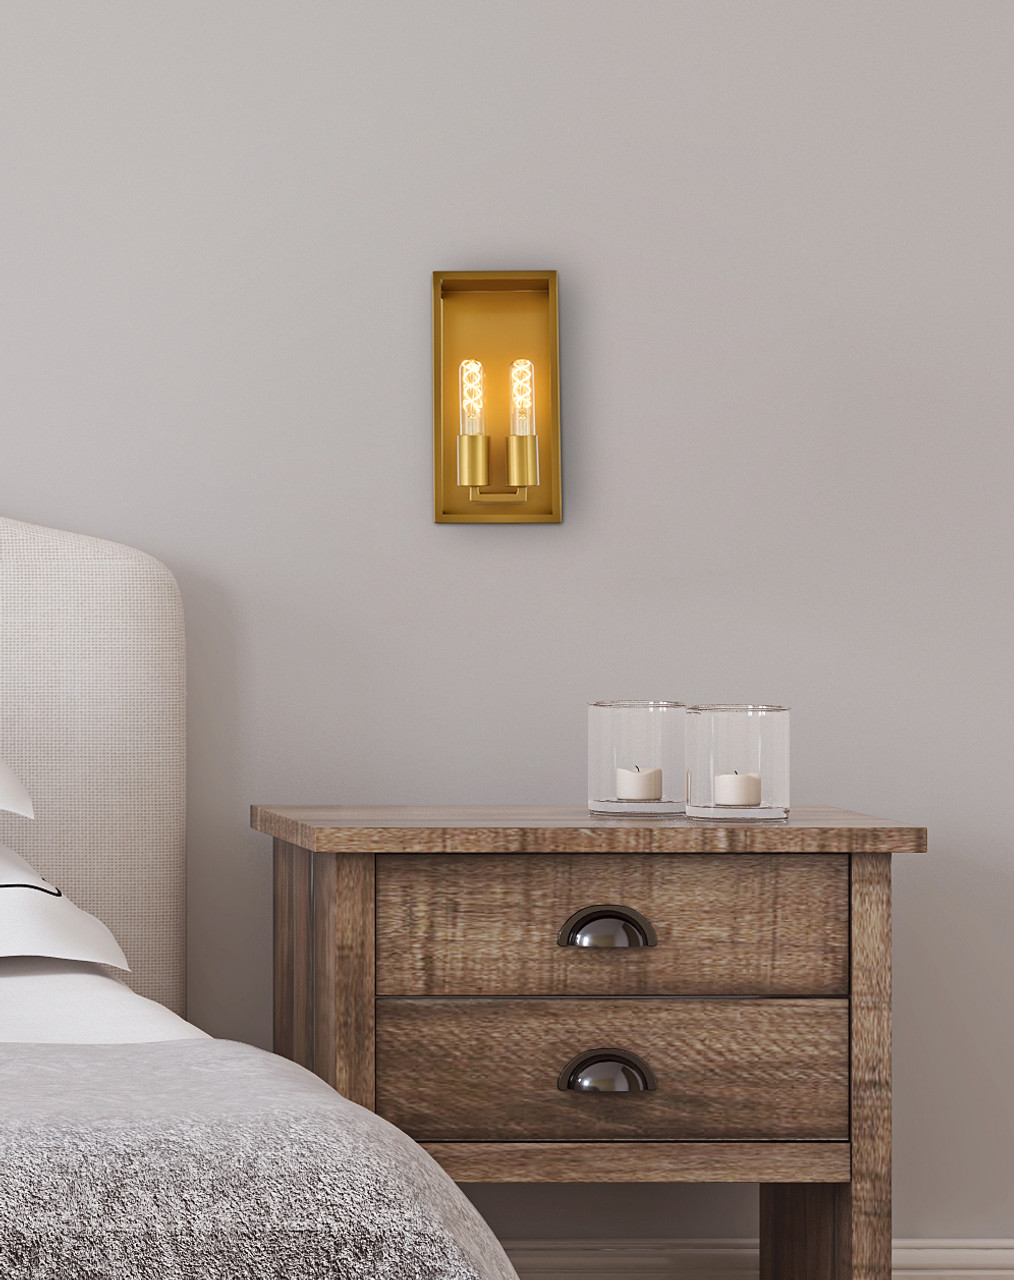 Living Disrict LD7055W6BR Voir 2 lights wall sconce in brass